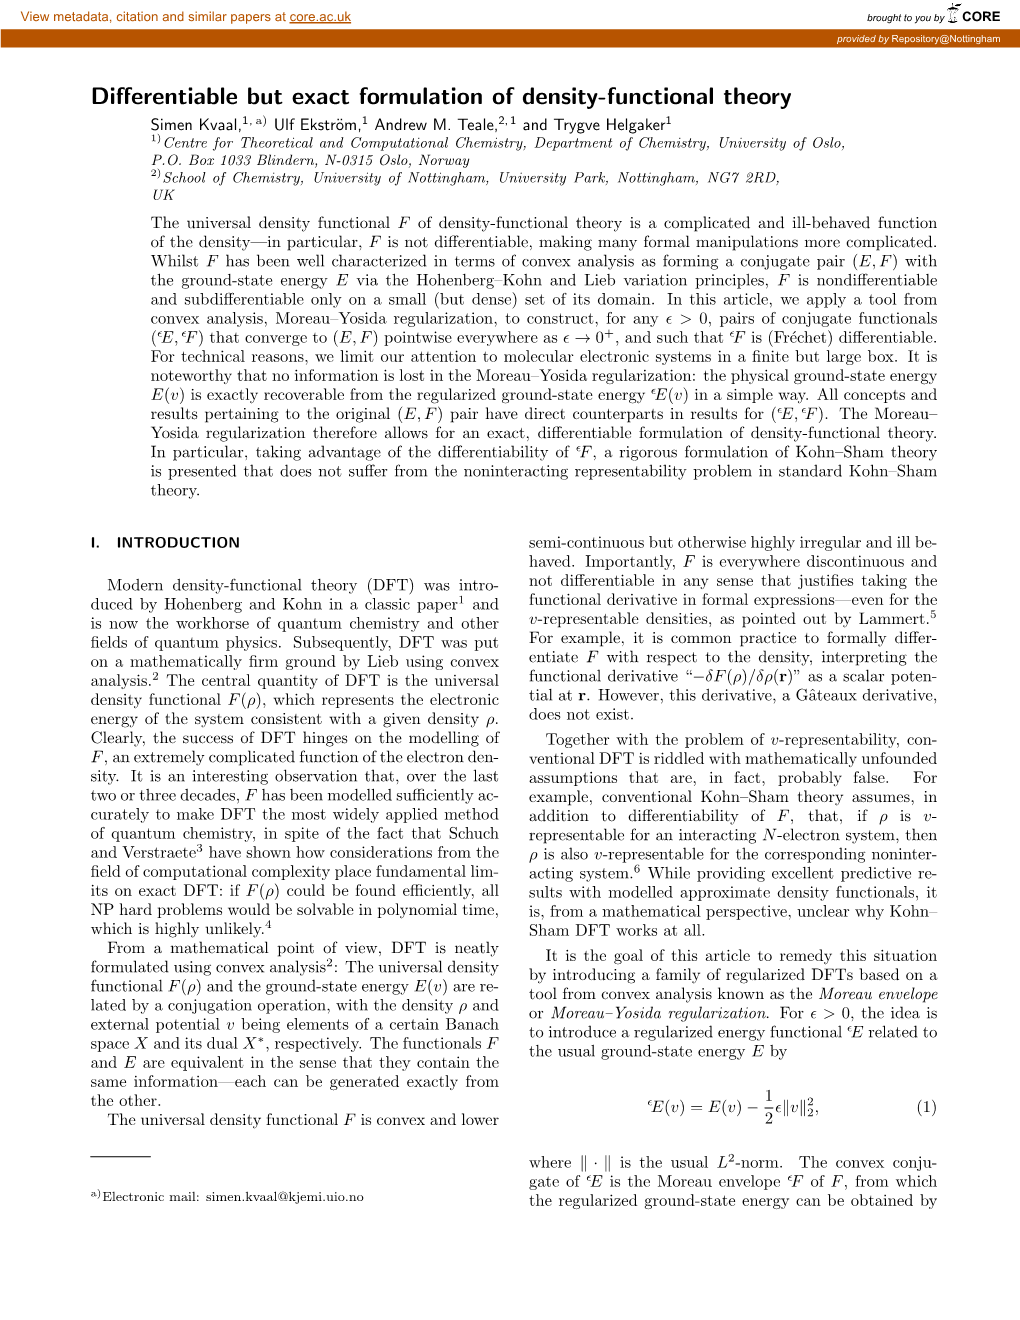 Differentiable but Exact Formulation of Density-Functional Theory